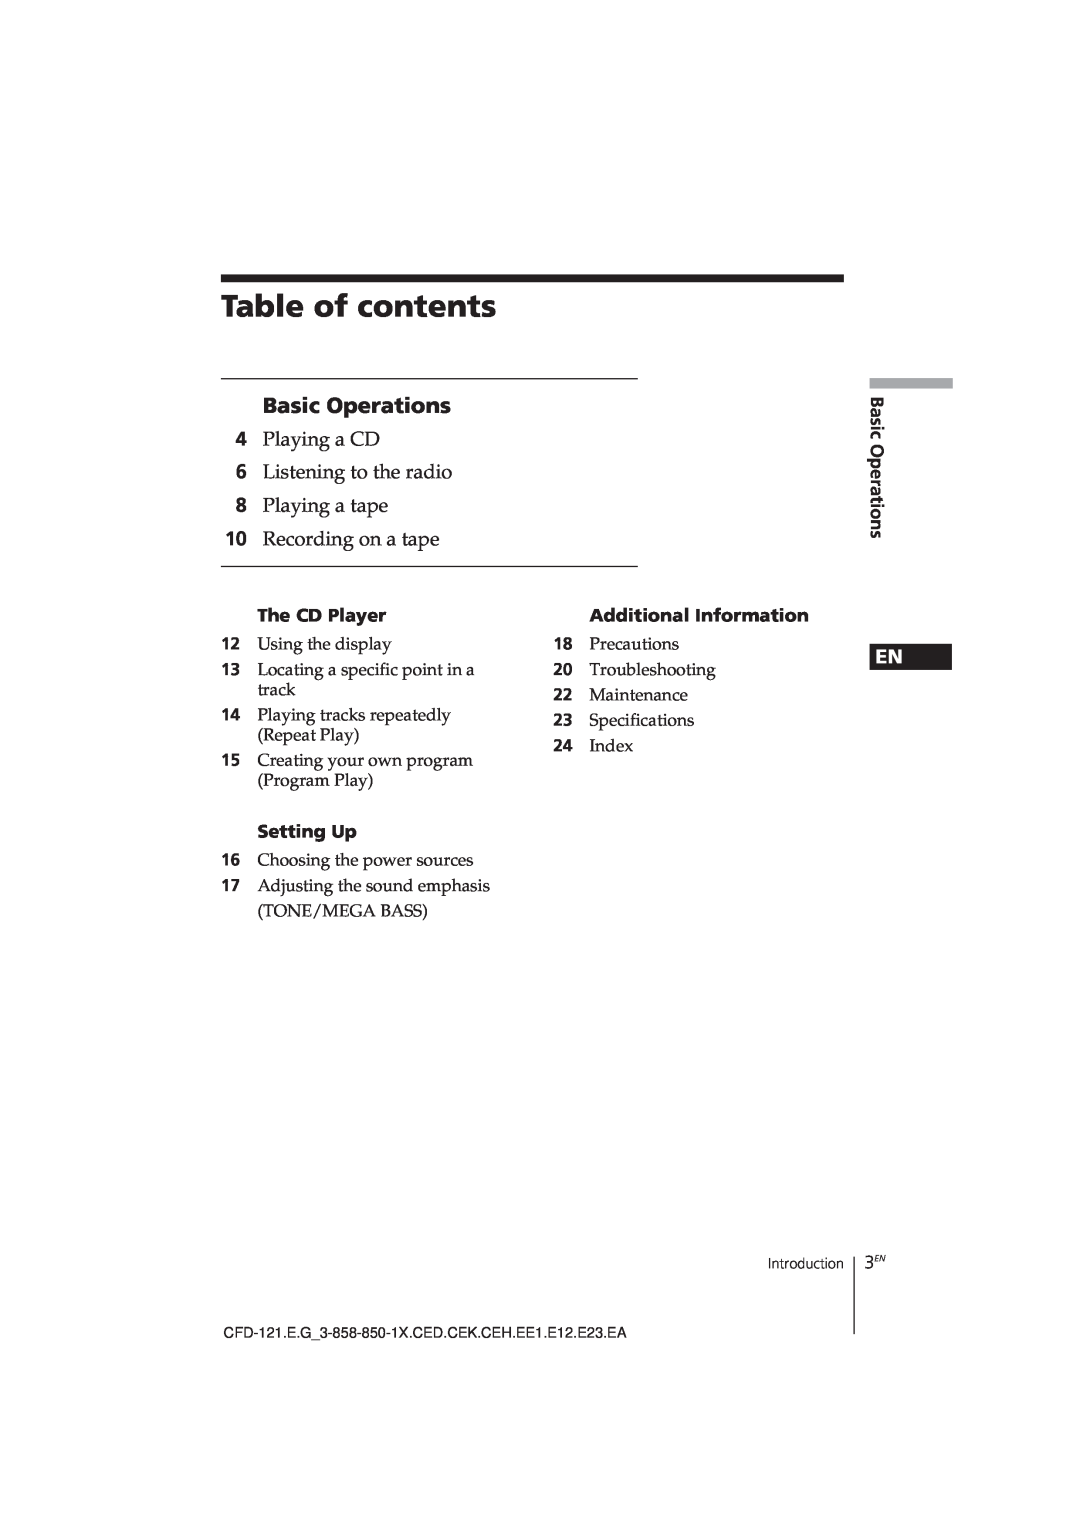 Sony CFD-121 Table of contents, Basic Operations, Playing a CD, Listening to the radio, Playing a tape 